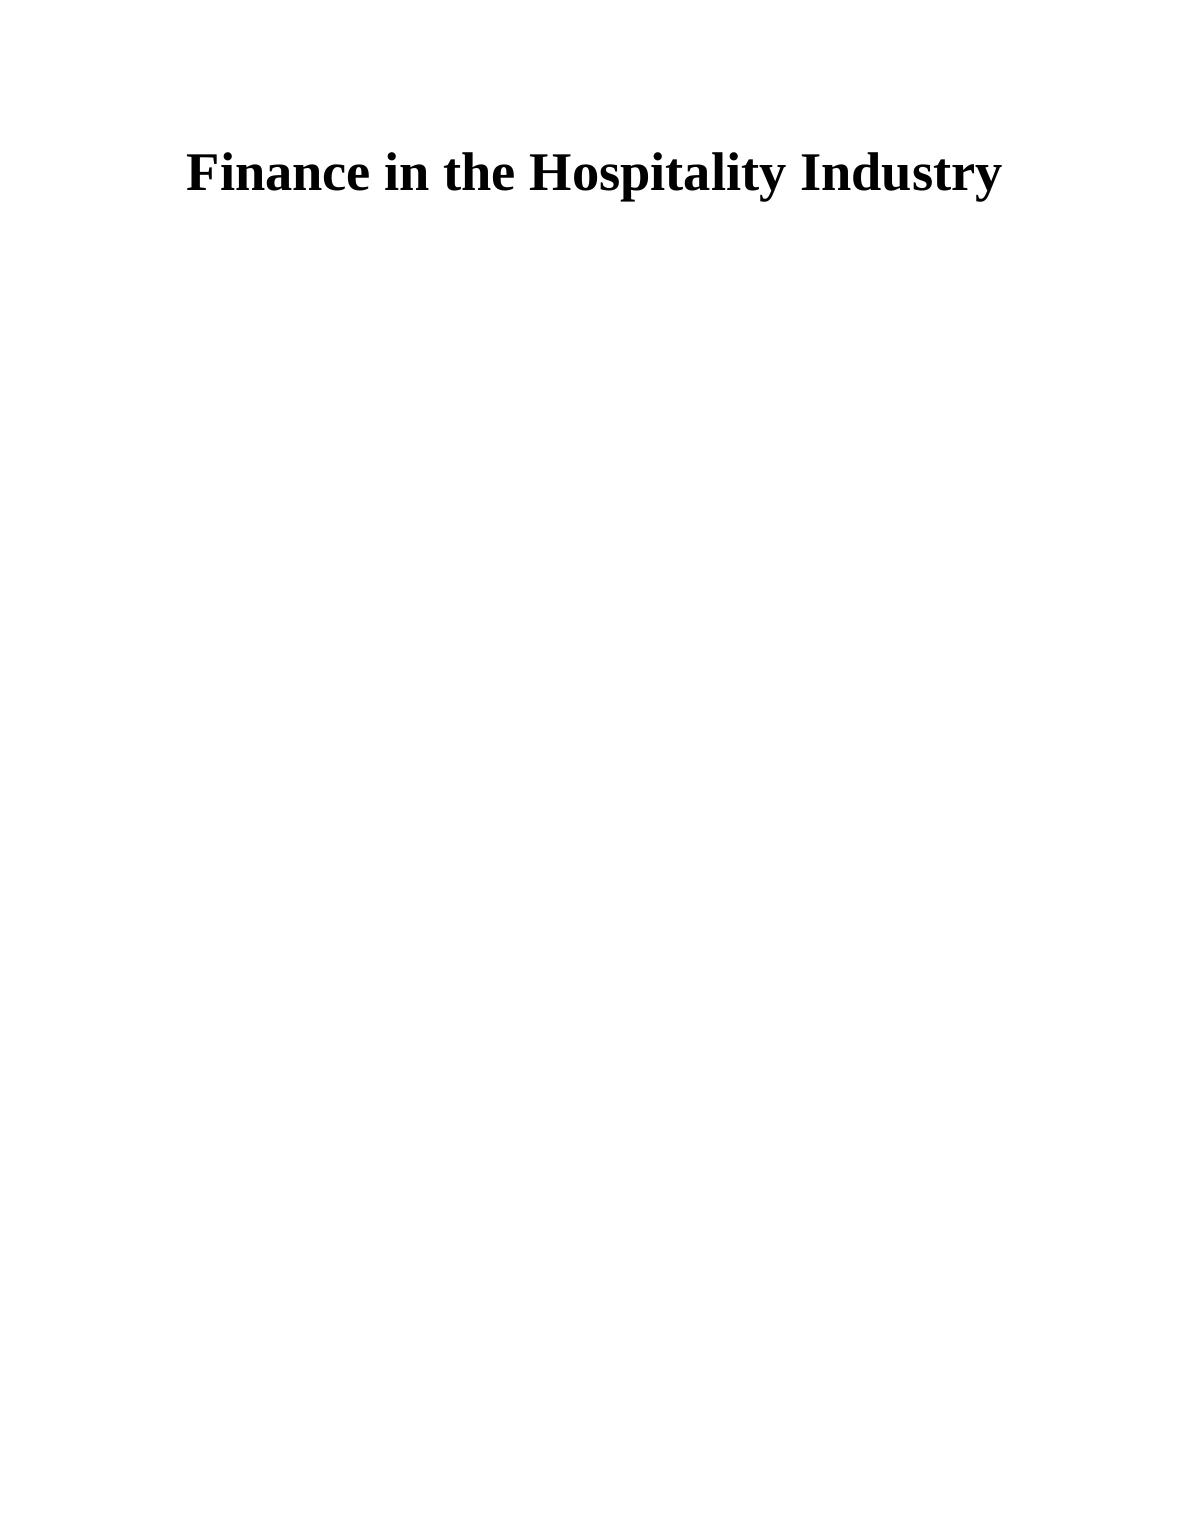 Report of Finance in the Hospitality Industry_1